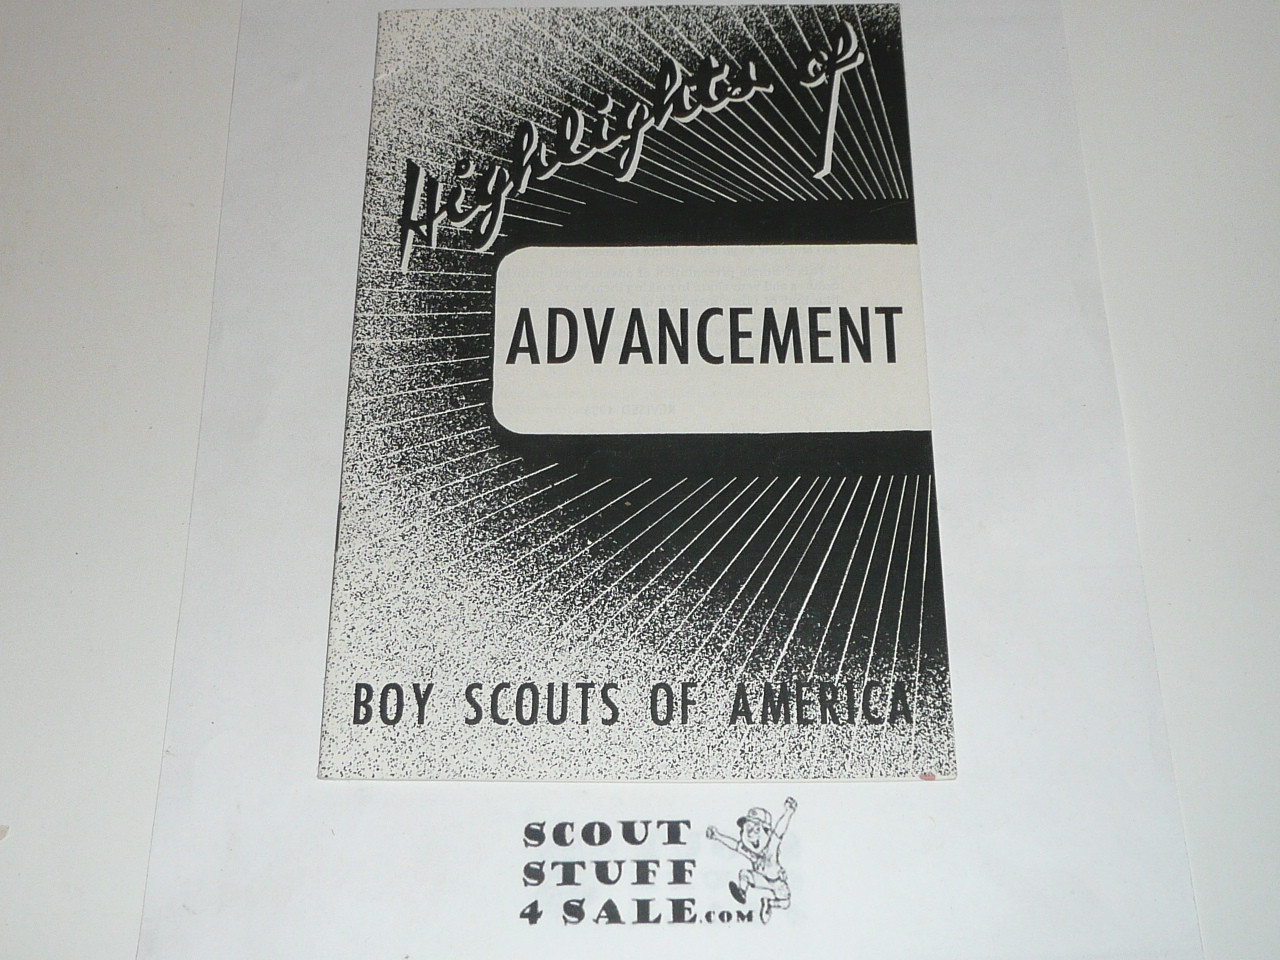 Highlights of Advancement, 2-56 printing